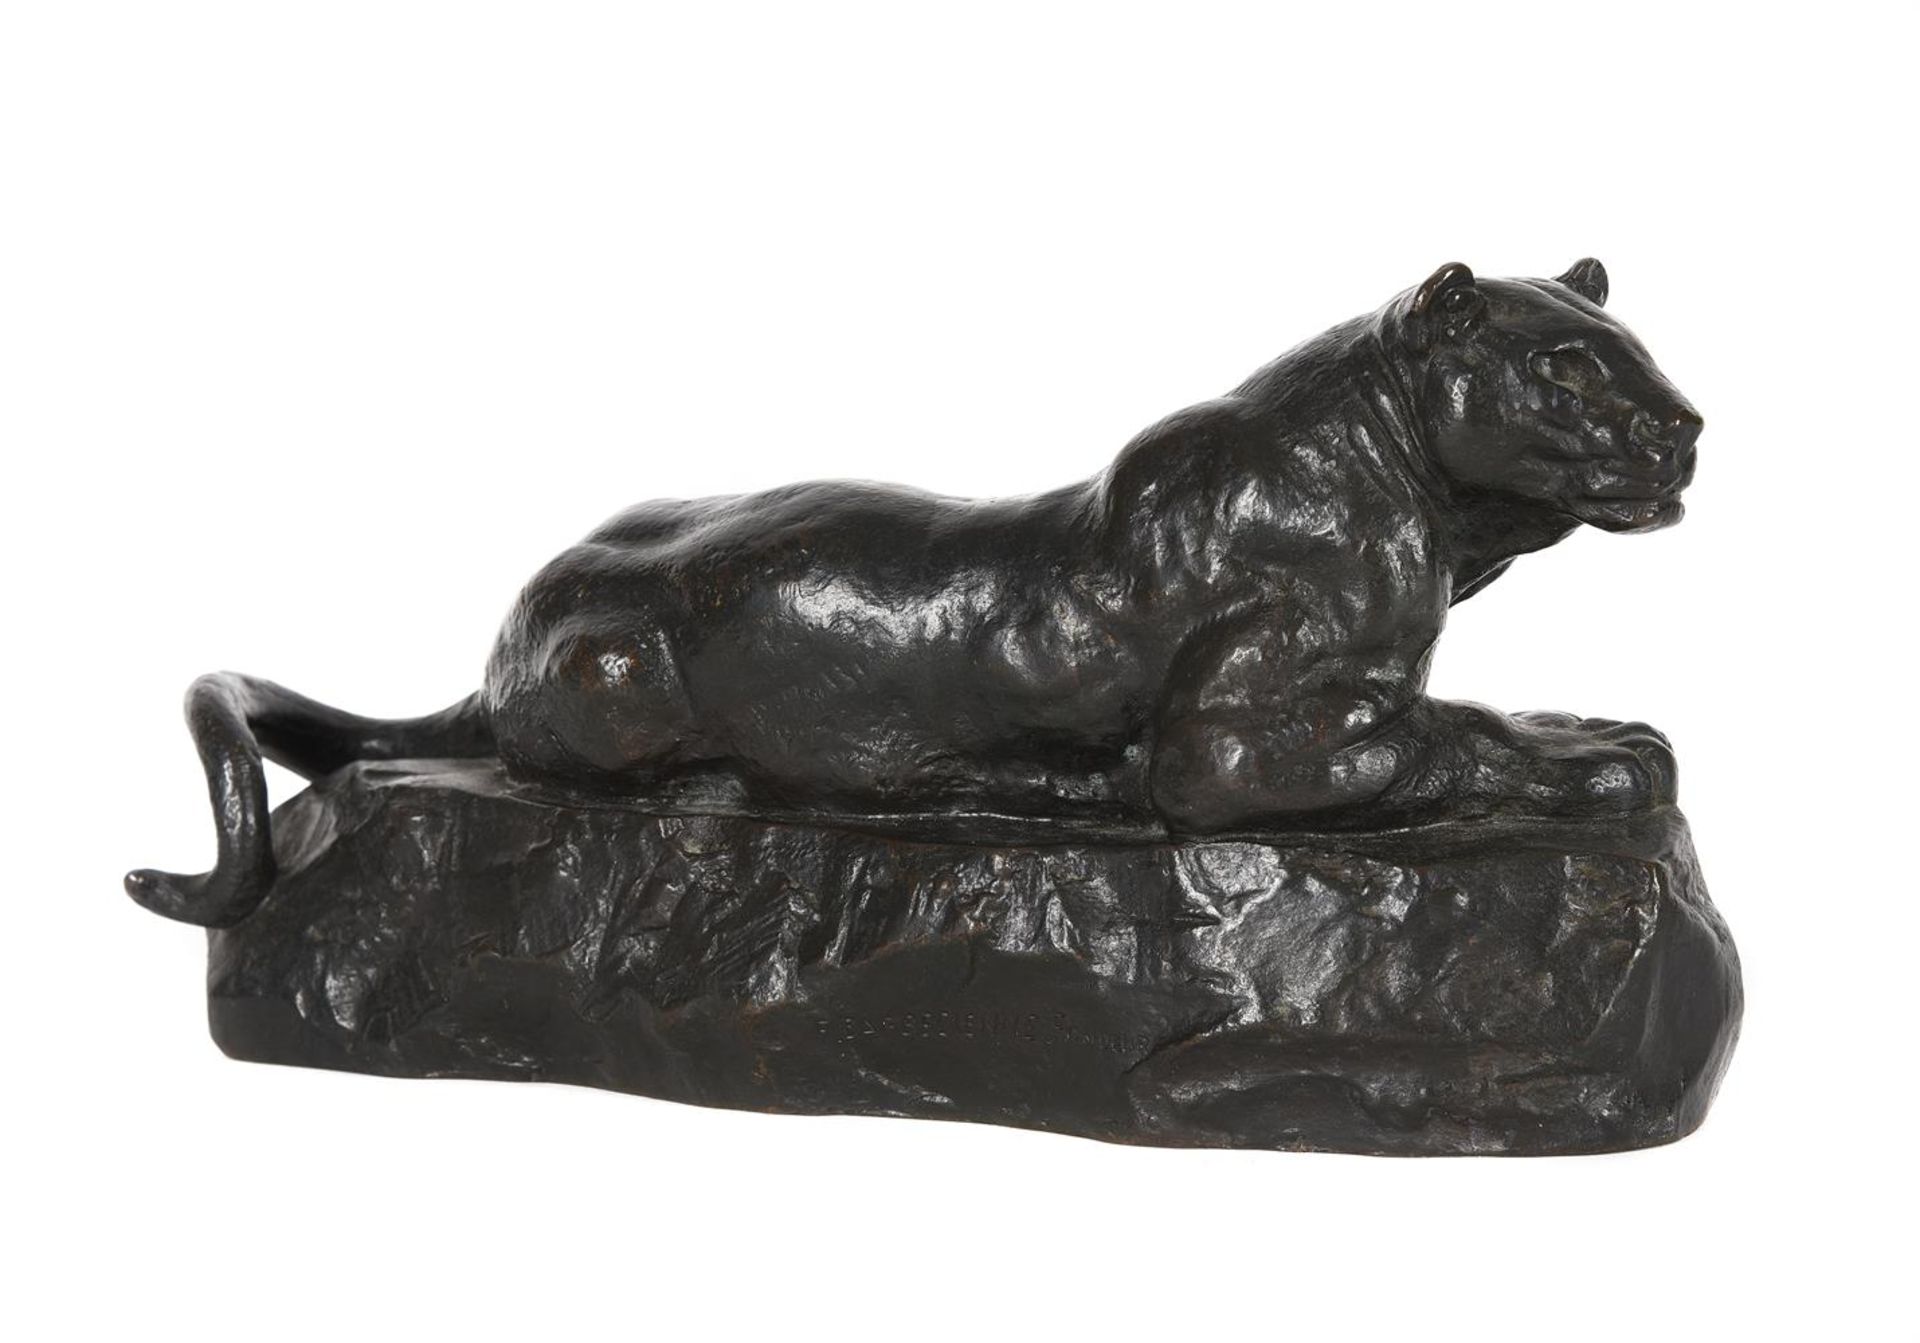 ANTOINE-LOUIS BARYE (1795-1875), A BARBEDIENNE ANIMALIER BRONZE OF A RECUMBENT PANTHER - Image 2 of 4